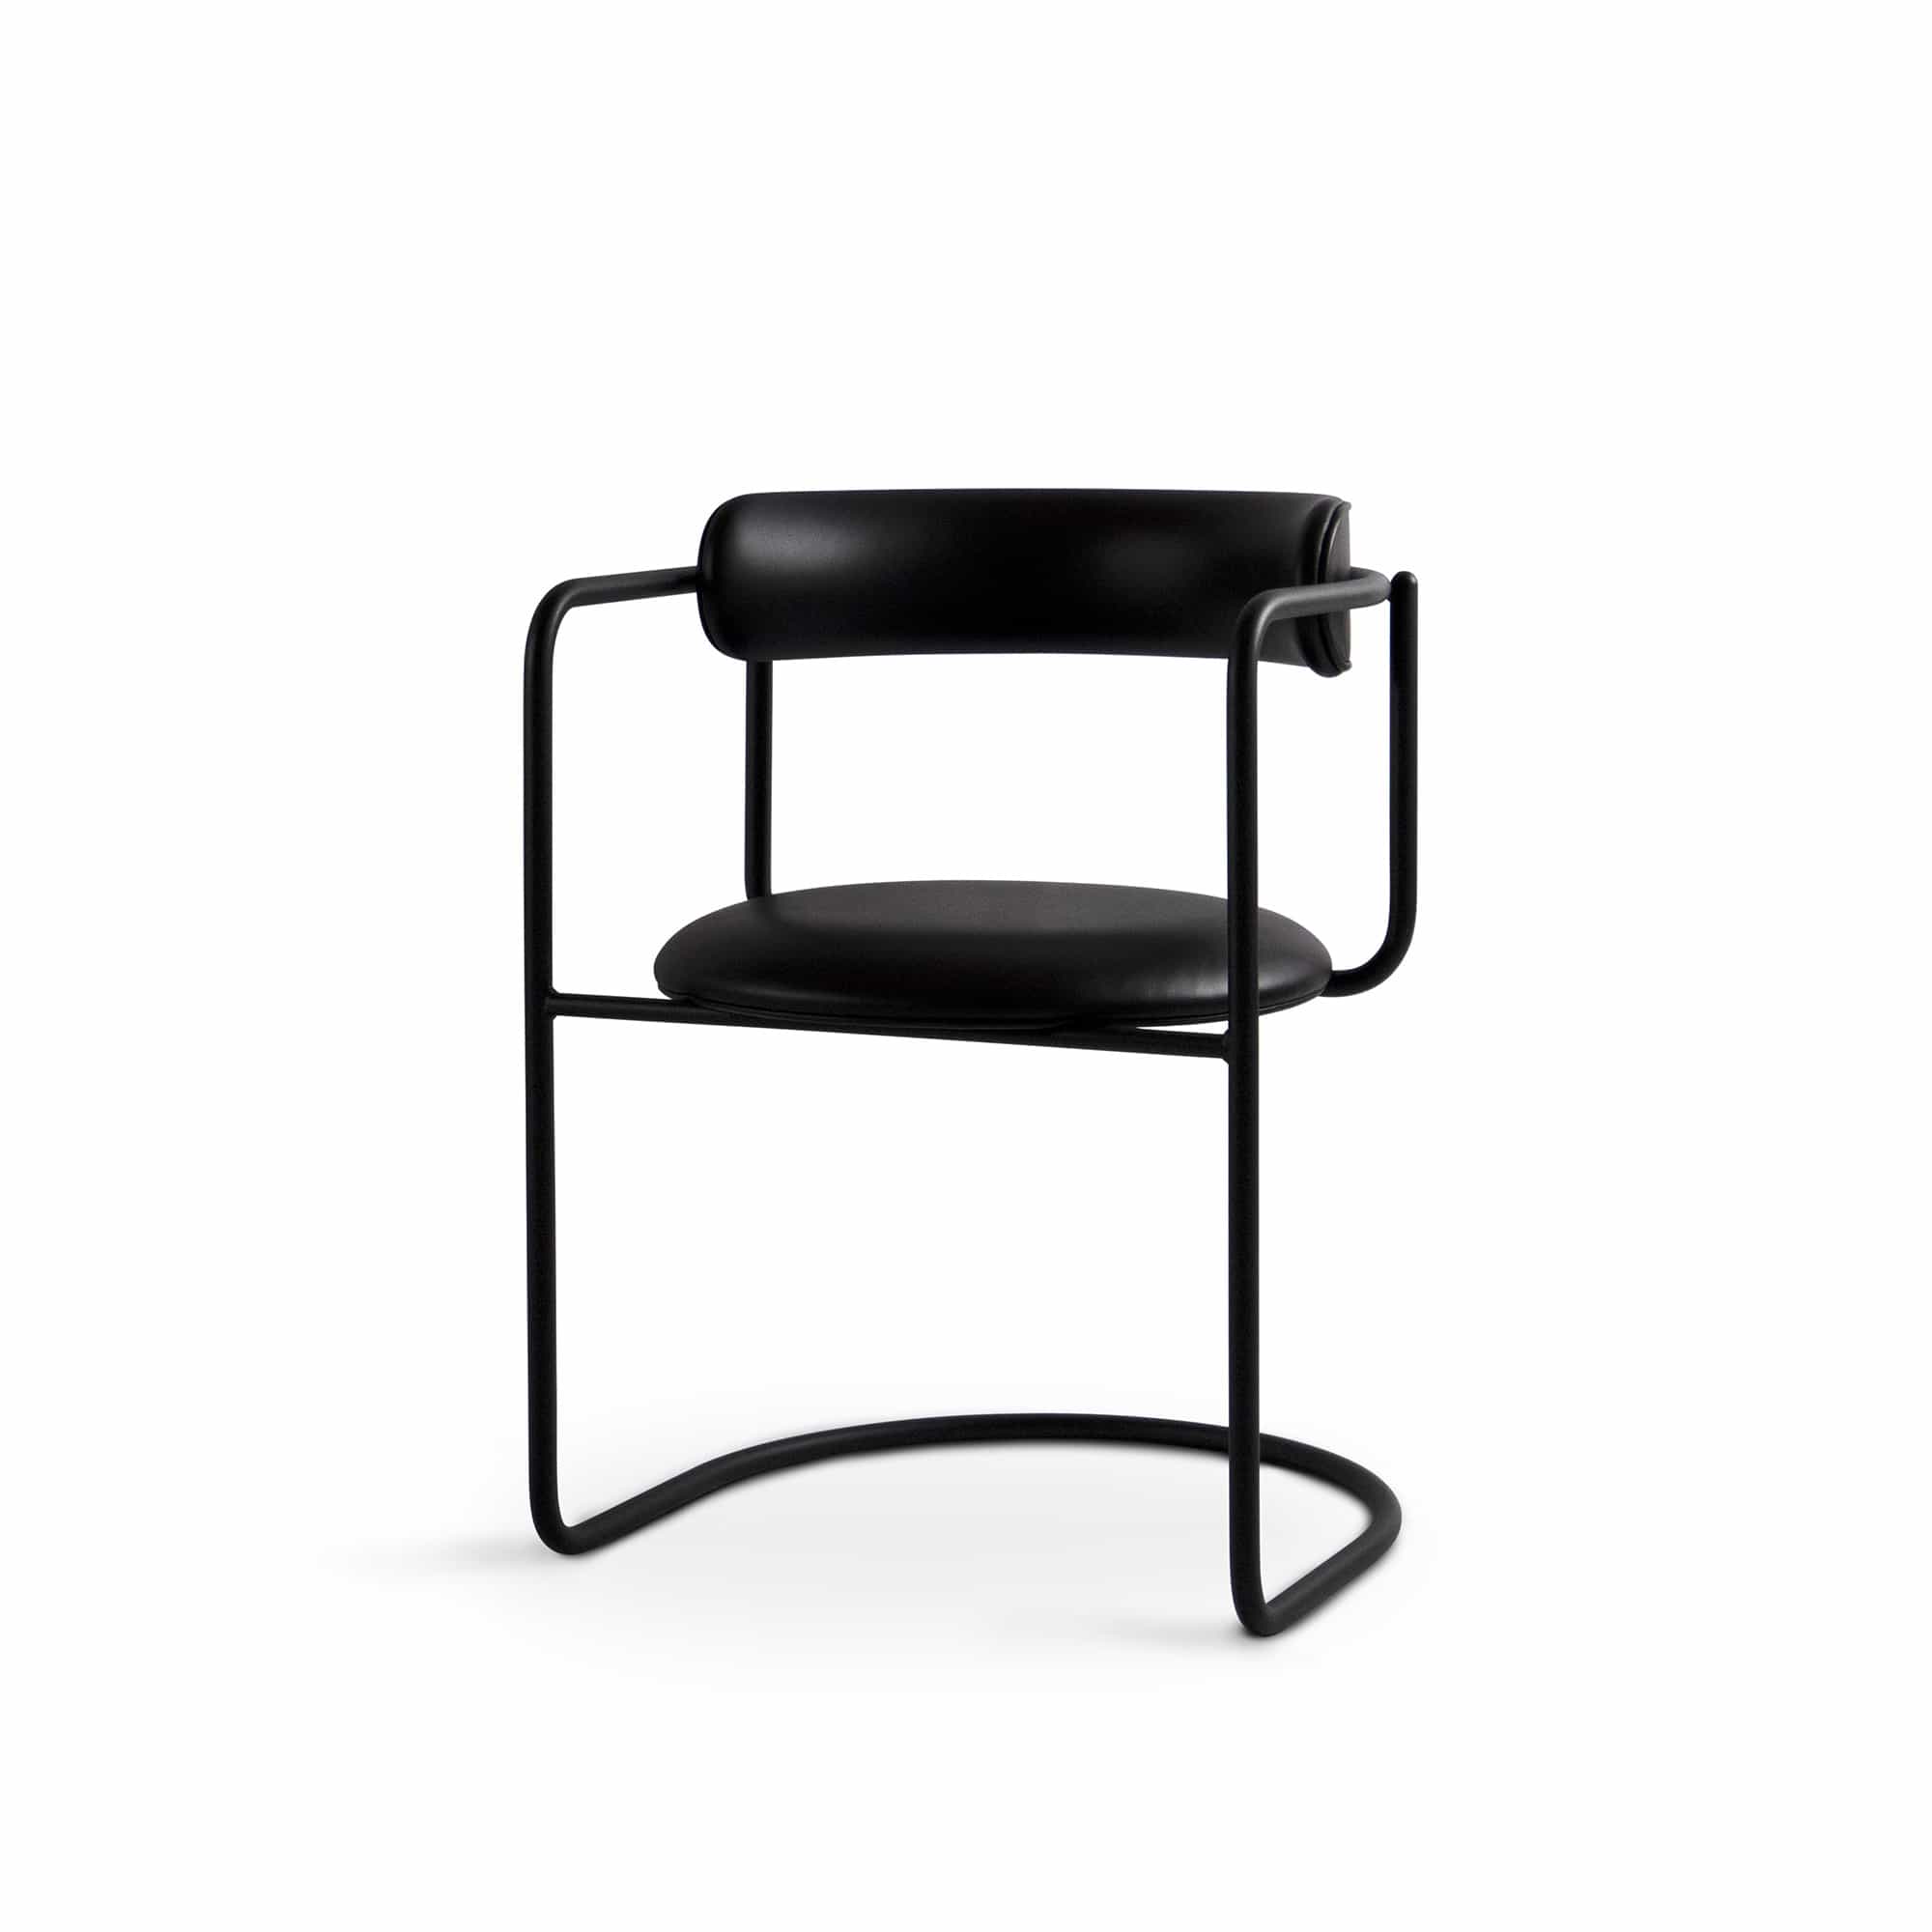 FF Cantilever Chair Rounded Black Legs